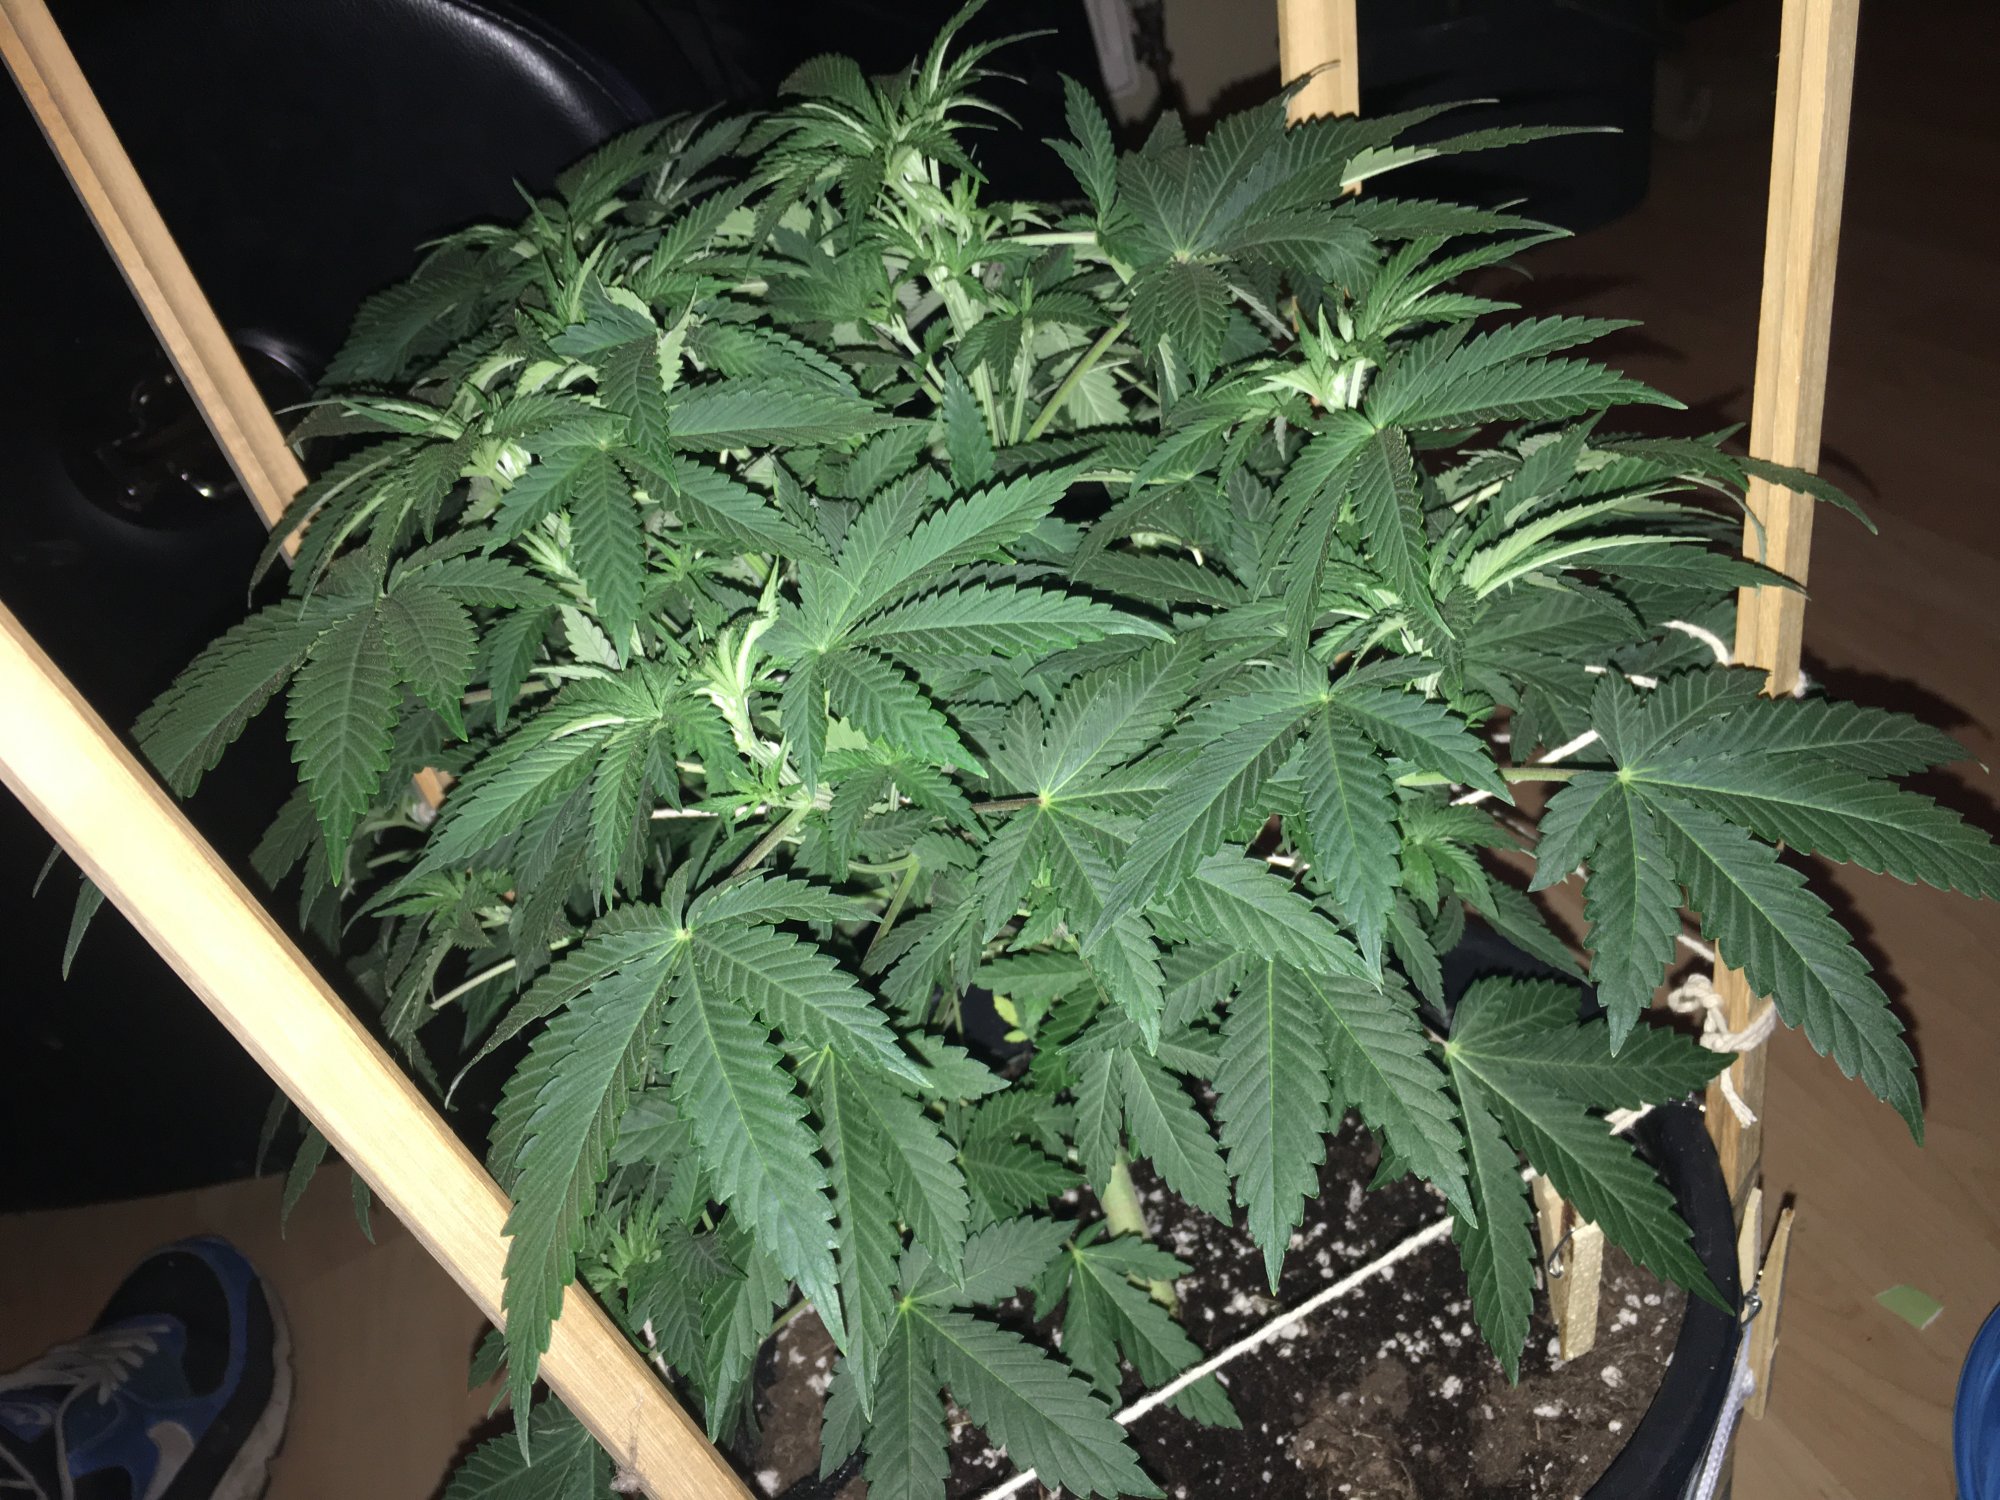 Trying lst for frist time 5